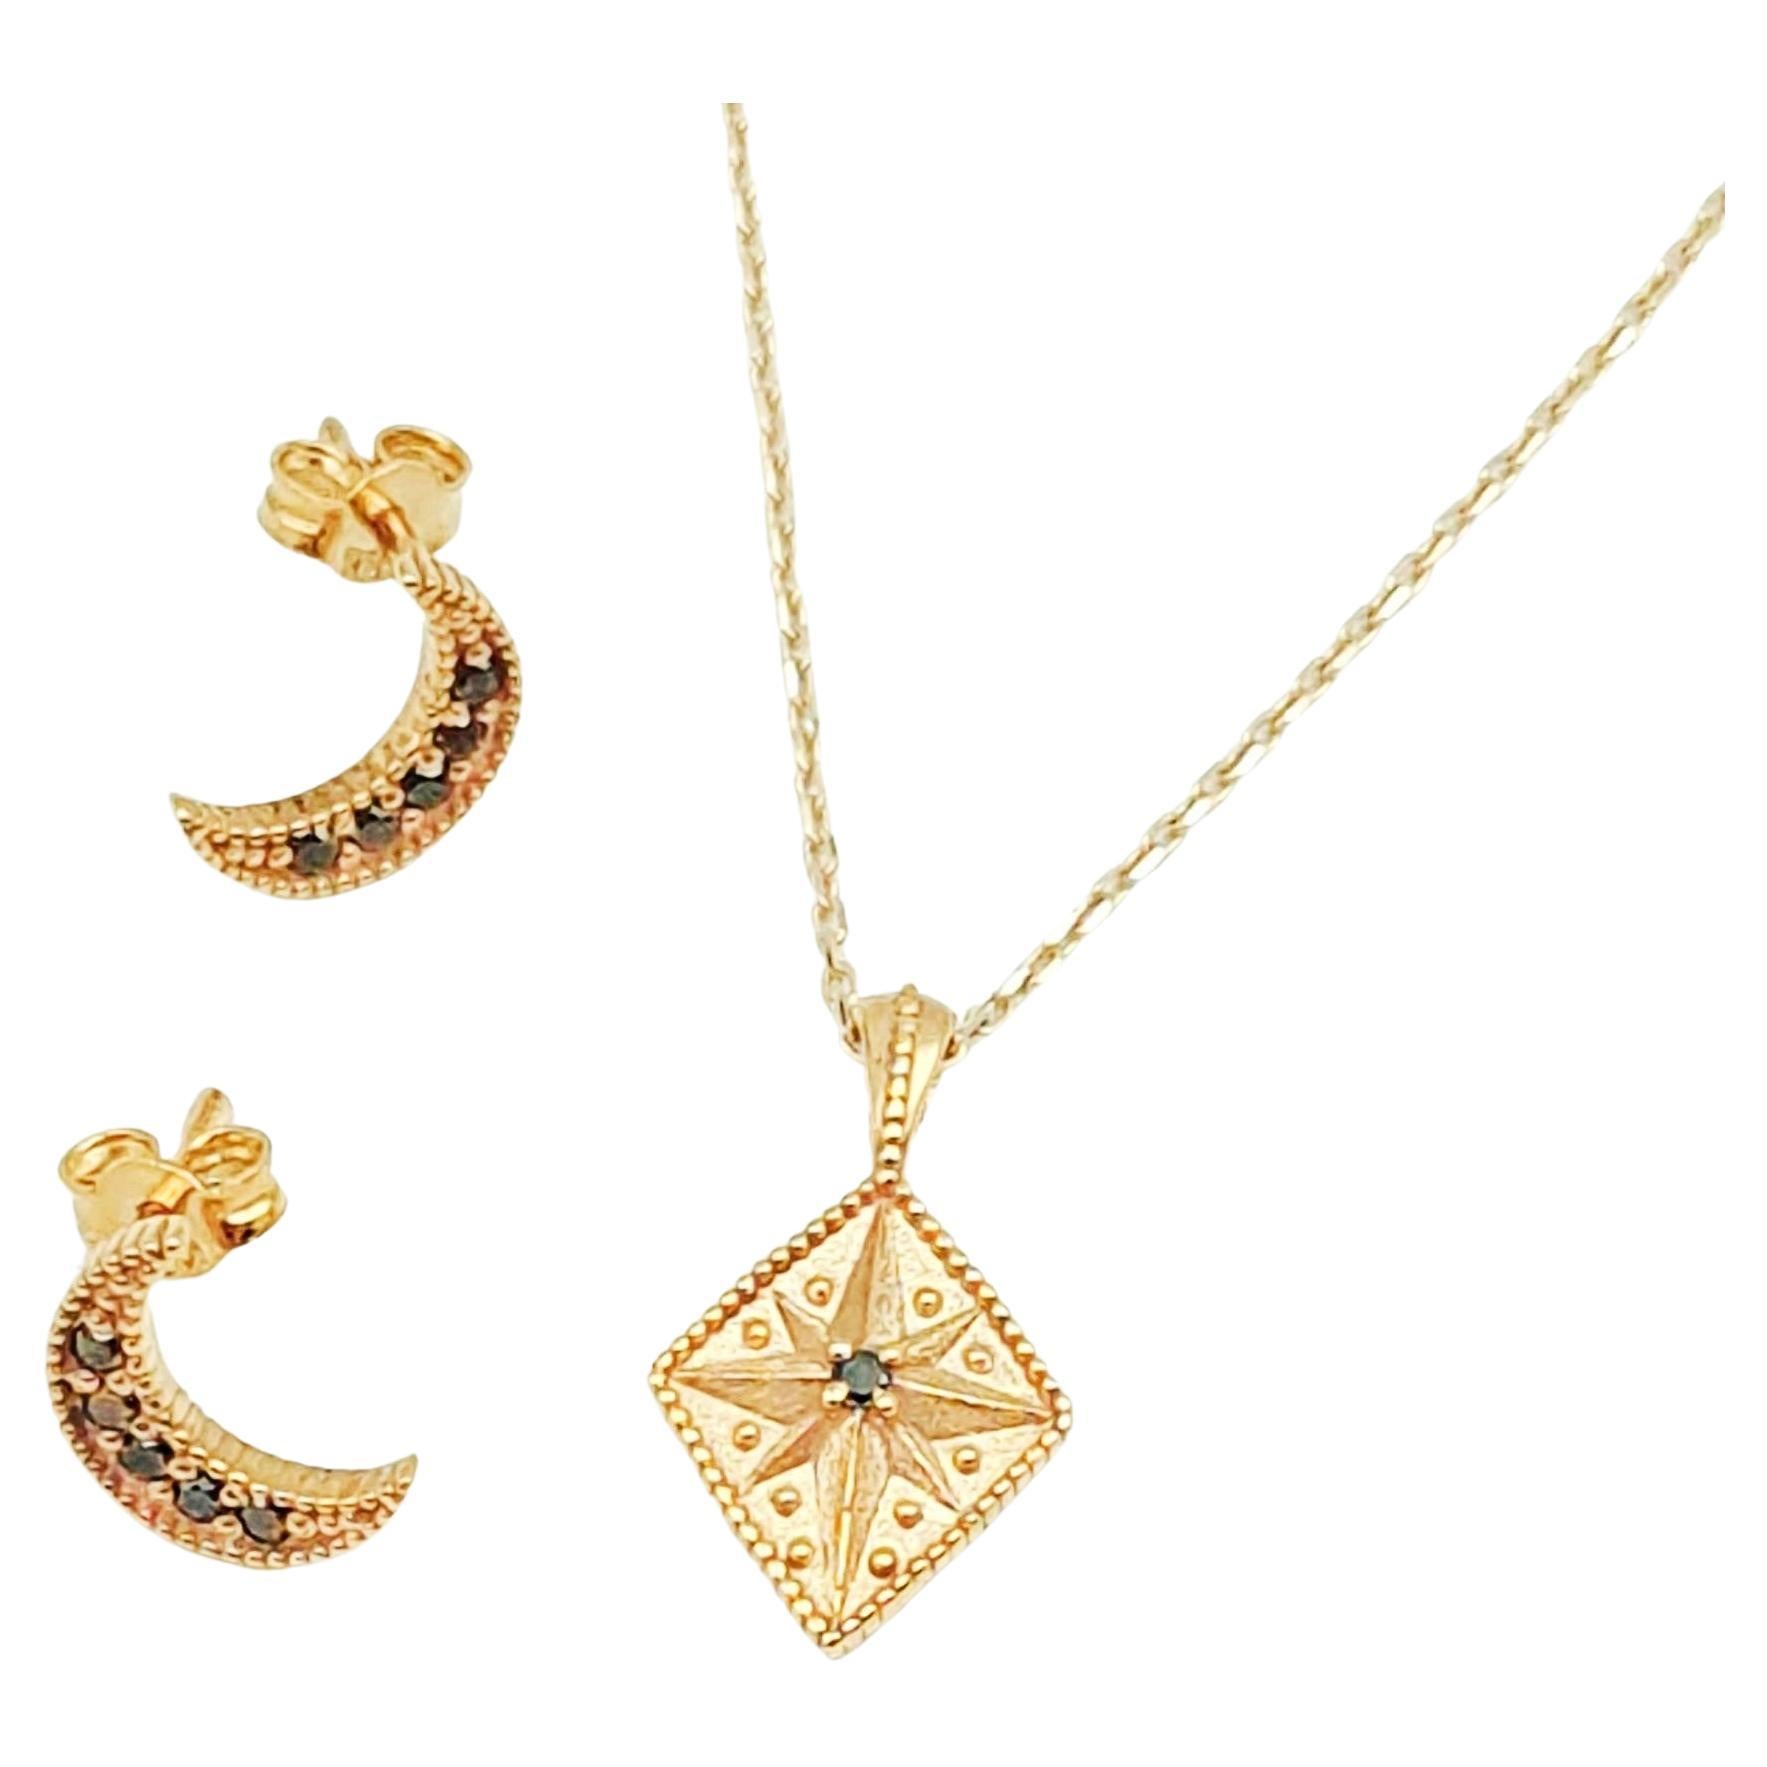 Dreamer Set, Black Diamonds and Yellow Gold Necklace and Earrings